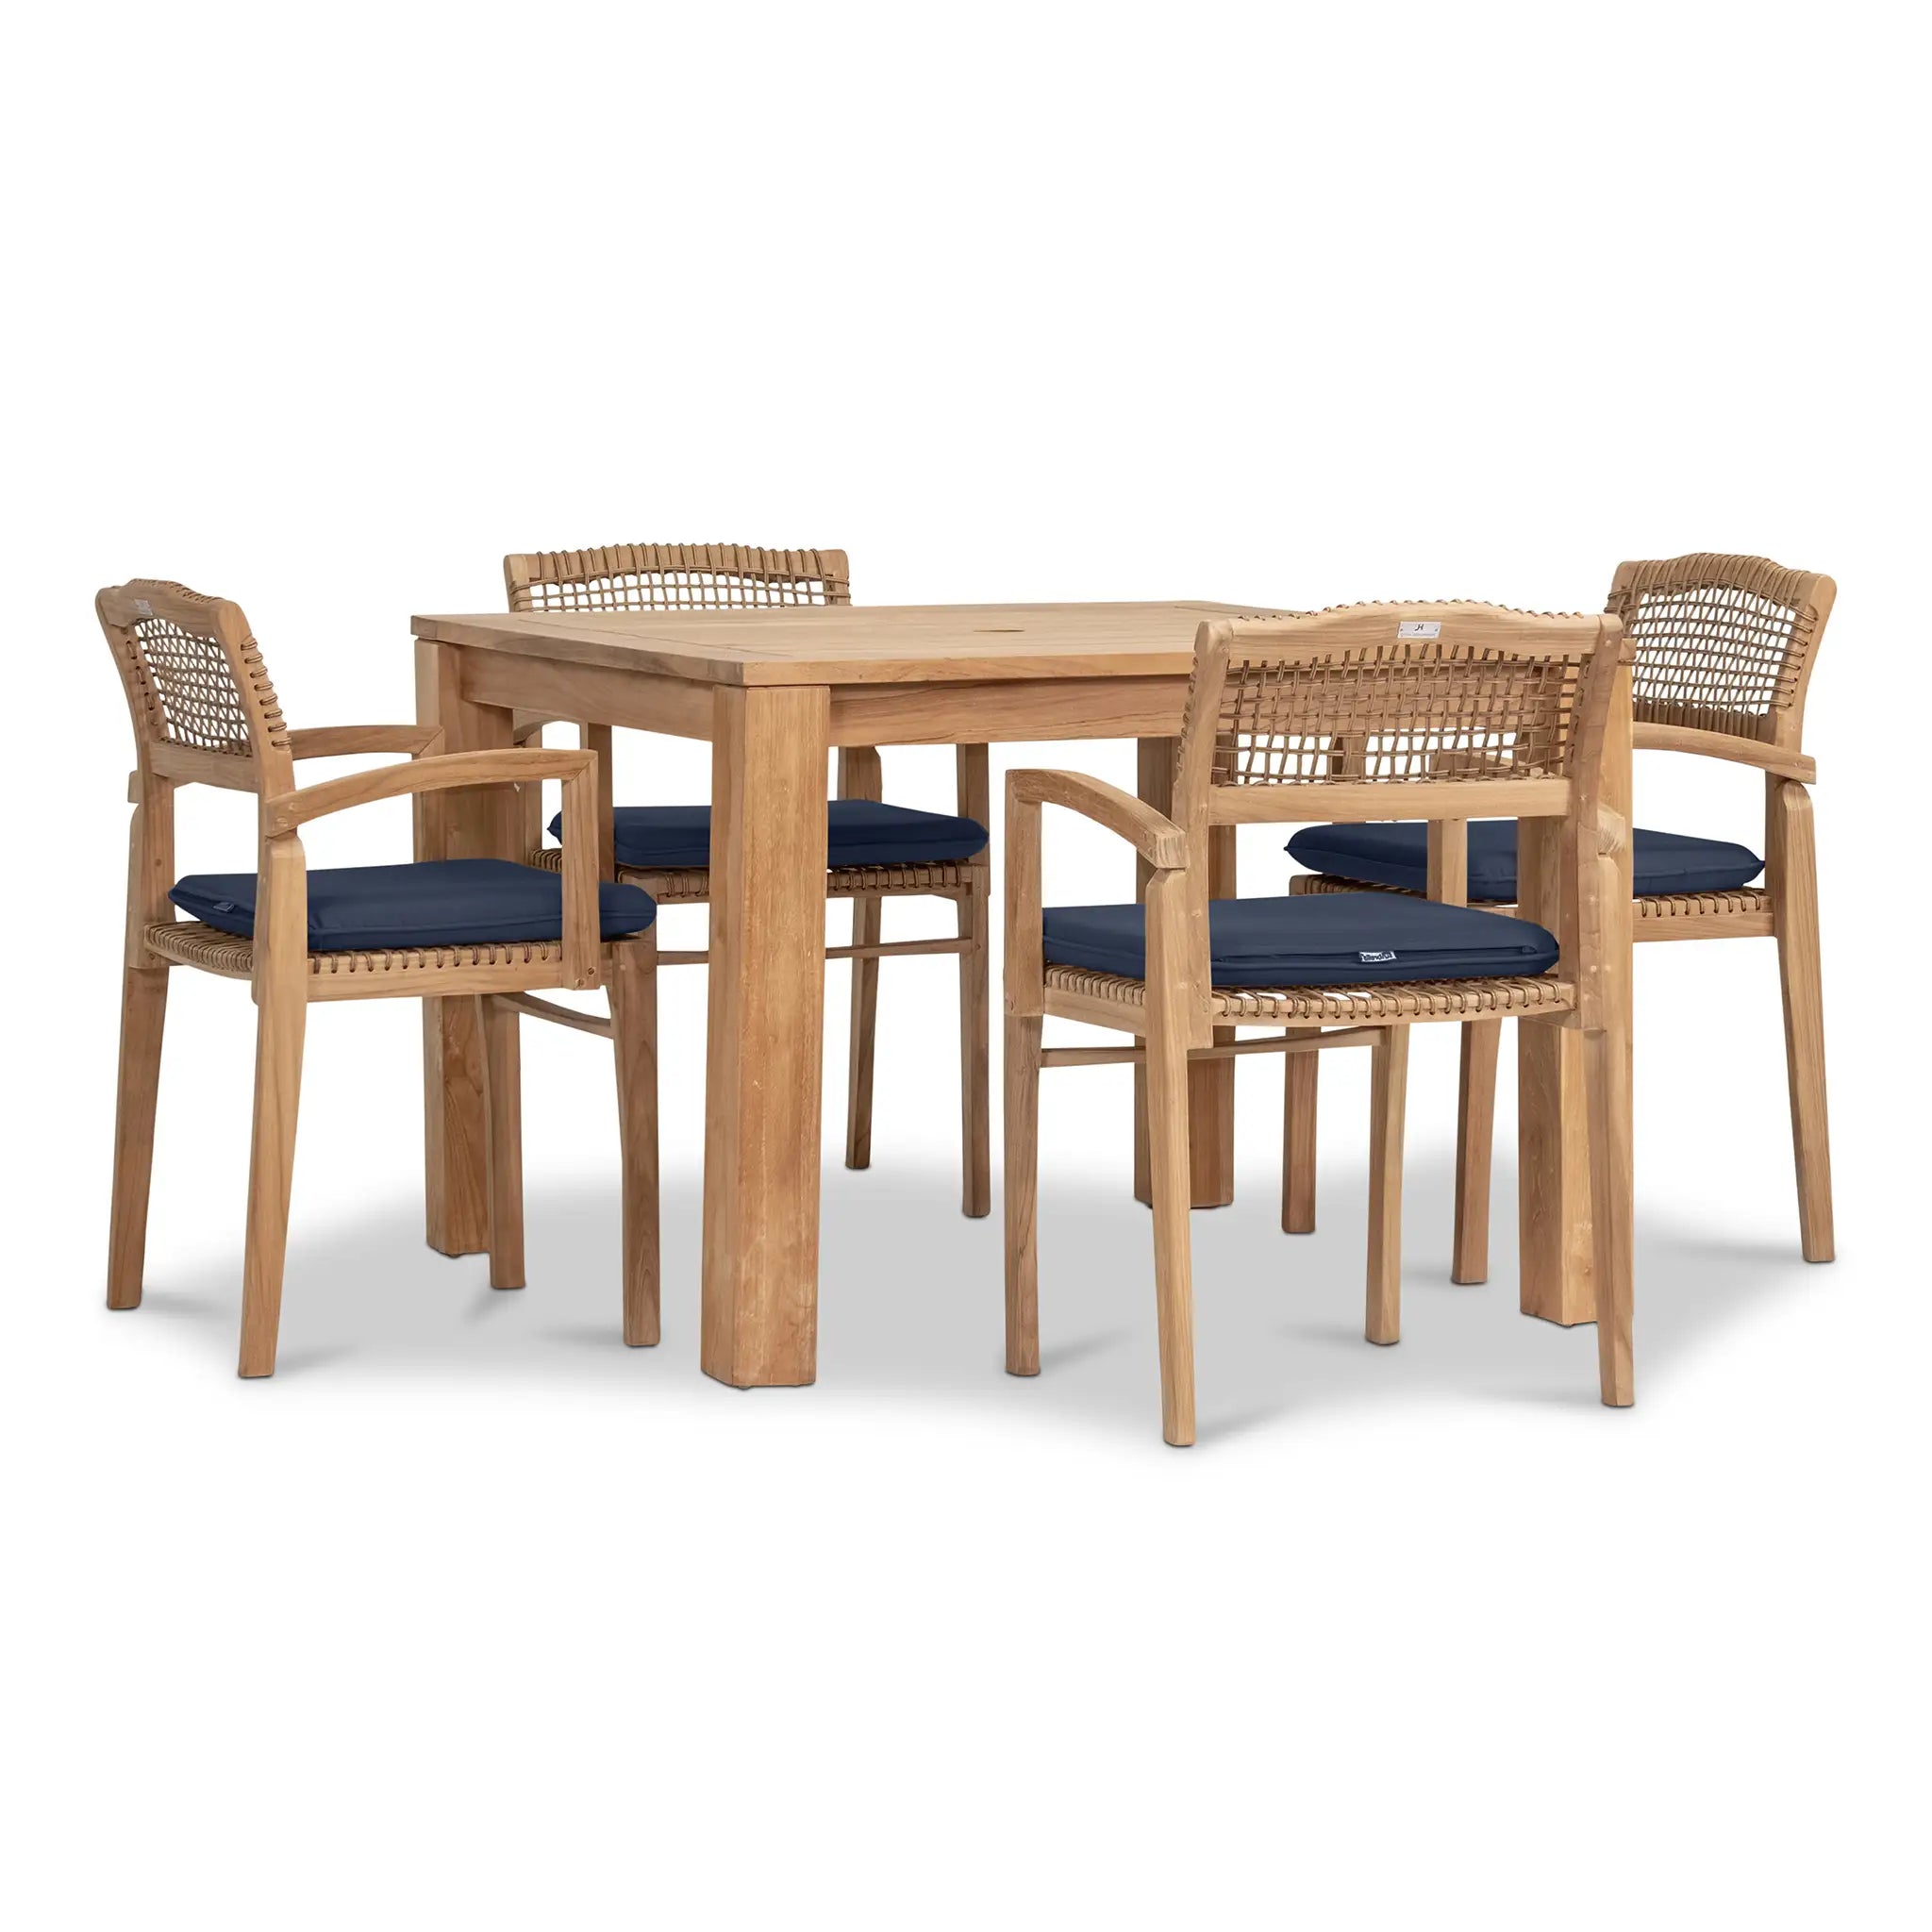 Sands 5 Piece Arm Dining Set by Harmonia Living